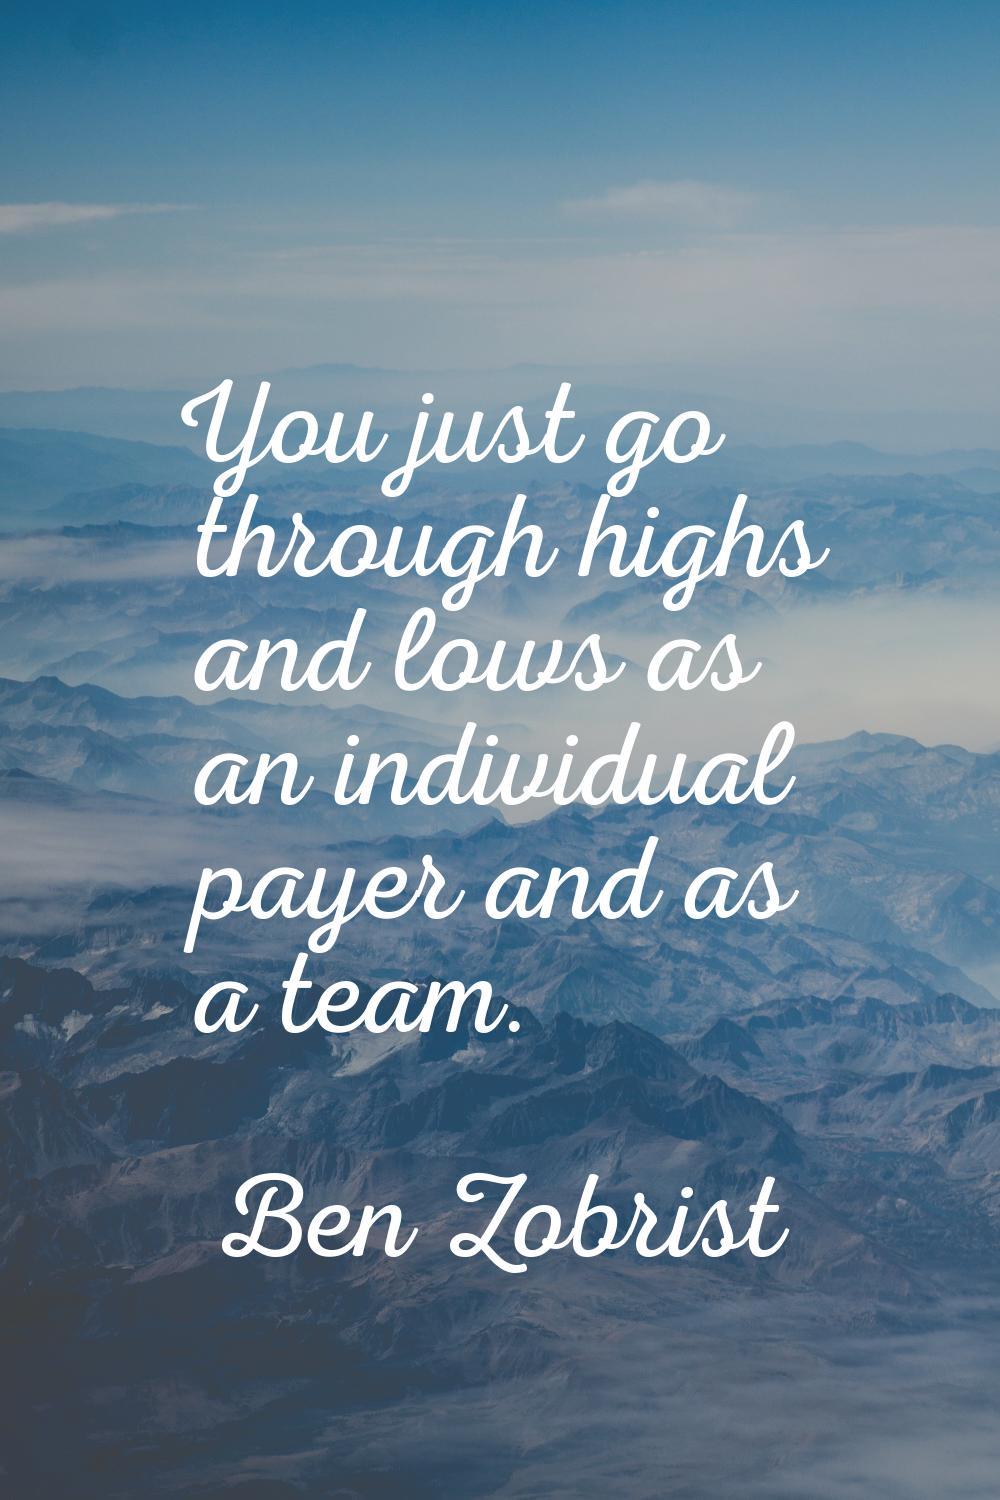 You just go through highs and lows as an individual payer and as a team.